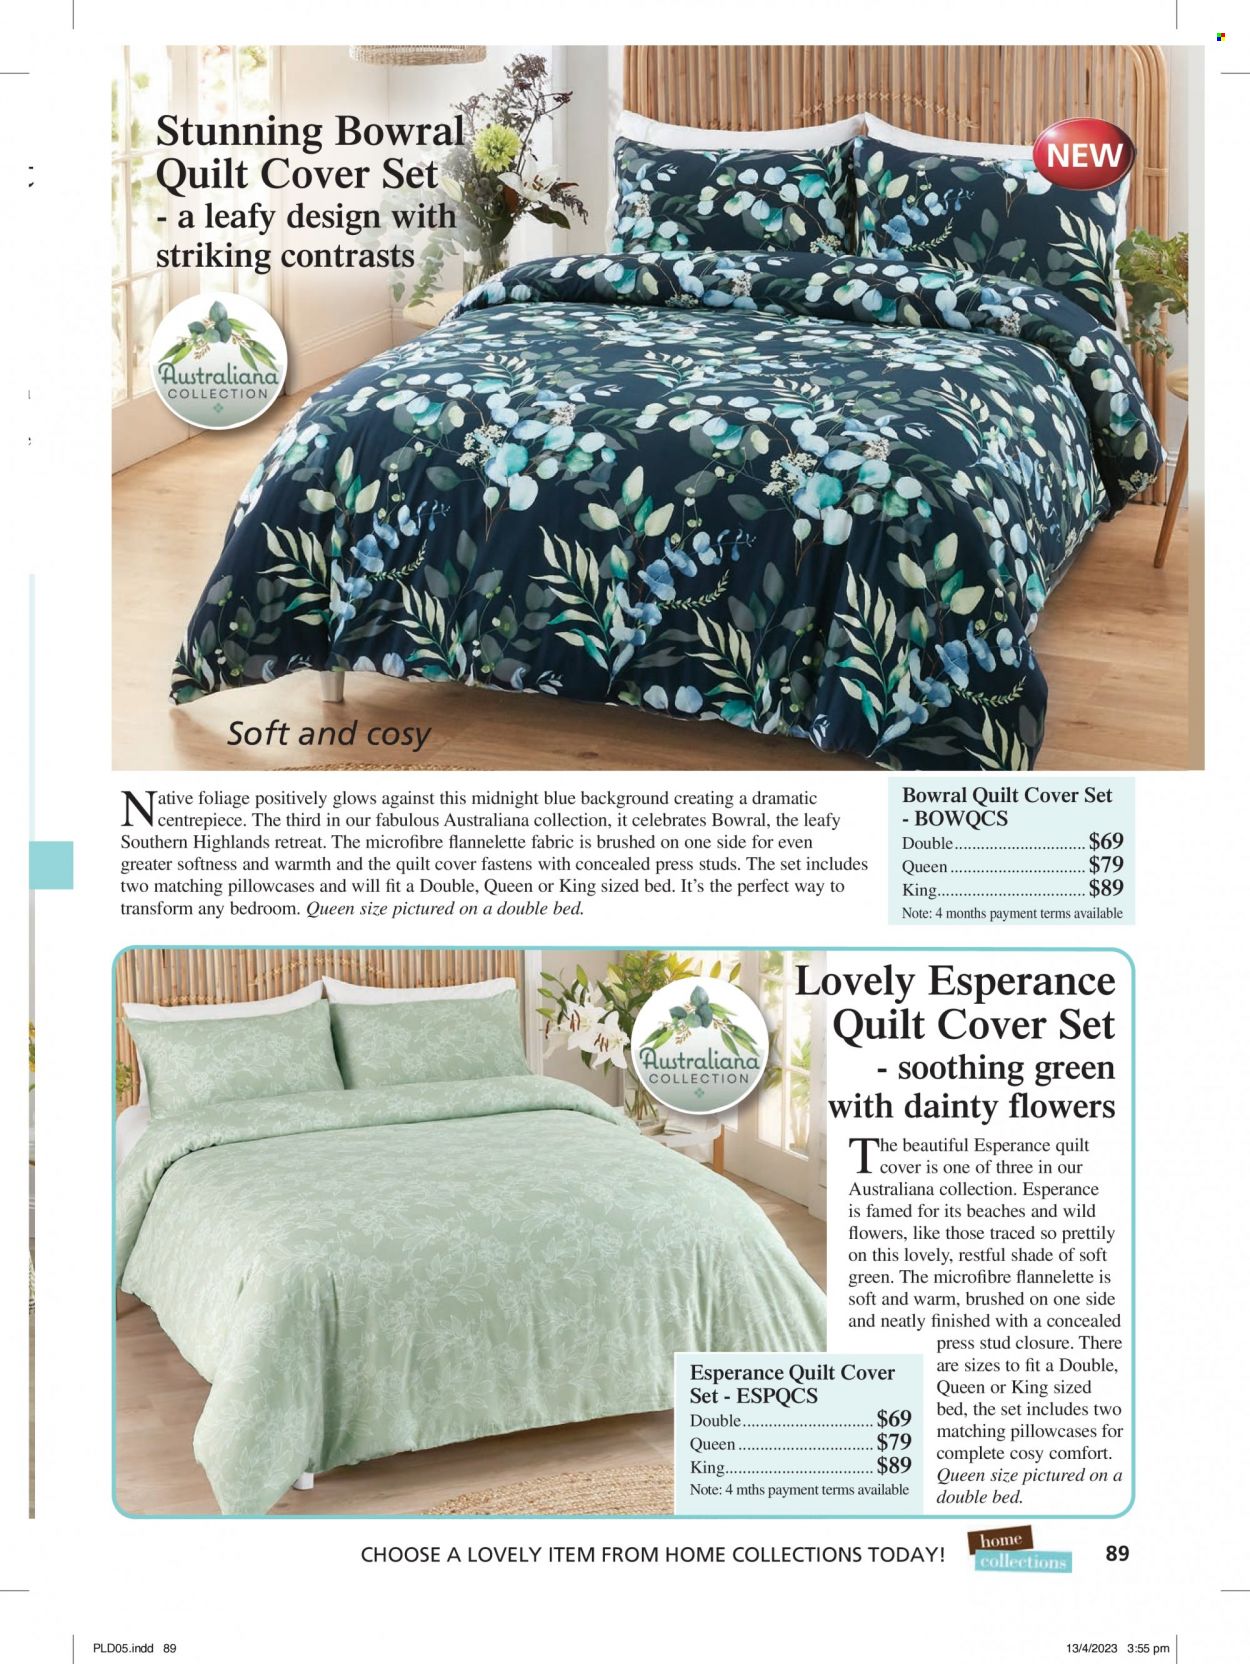 thumbnail - Innovations Catalogue - Sales products - pillowcase, quilt, quilt cover set. Page 89.